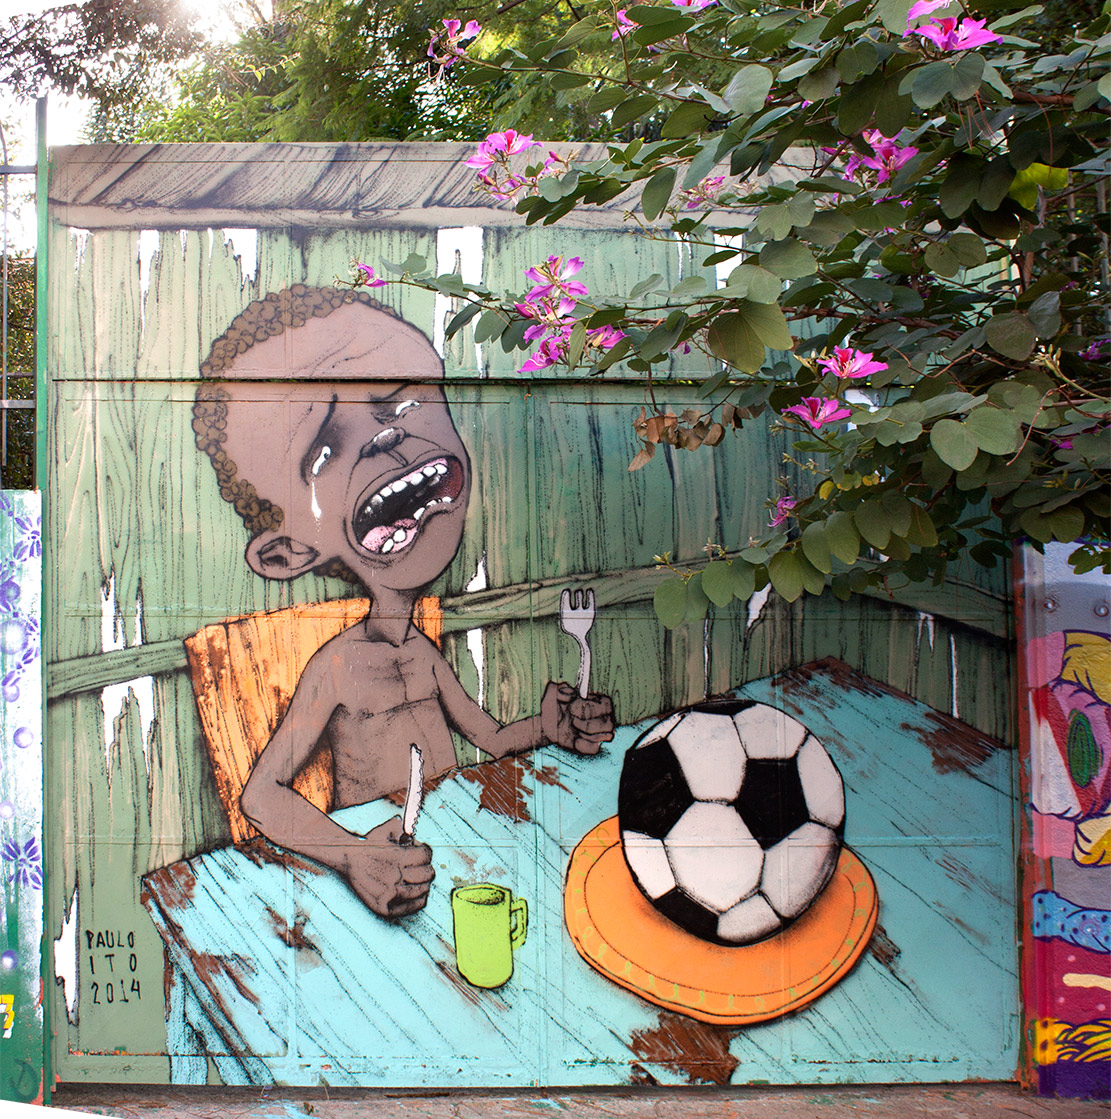 Street Art by Paulo Ito in Pompeia, São Paulo, Brazil - Comment on 2014 FIFA World Cup Brazil